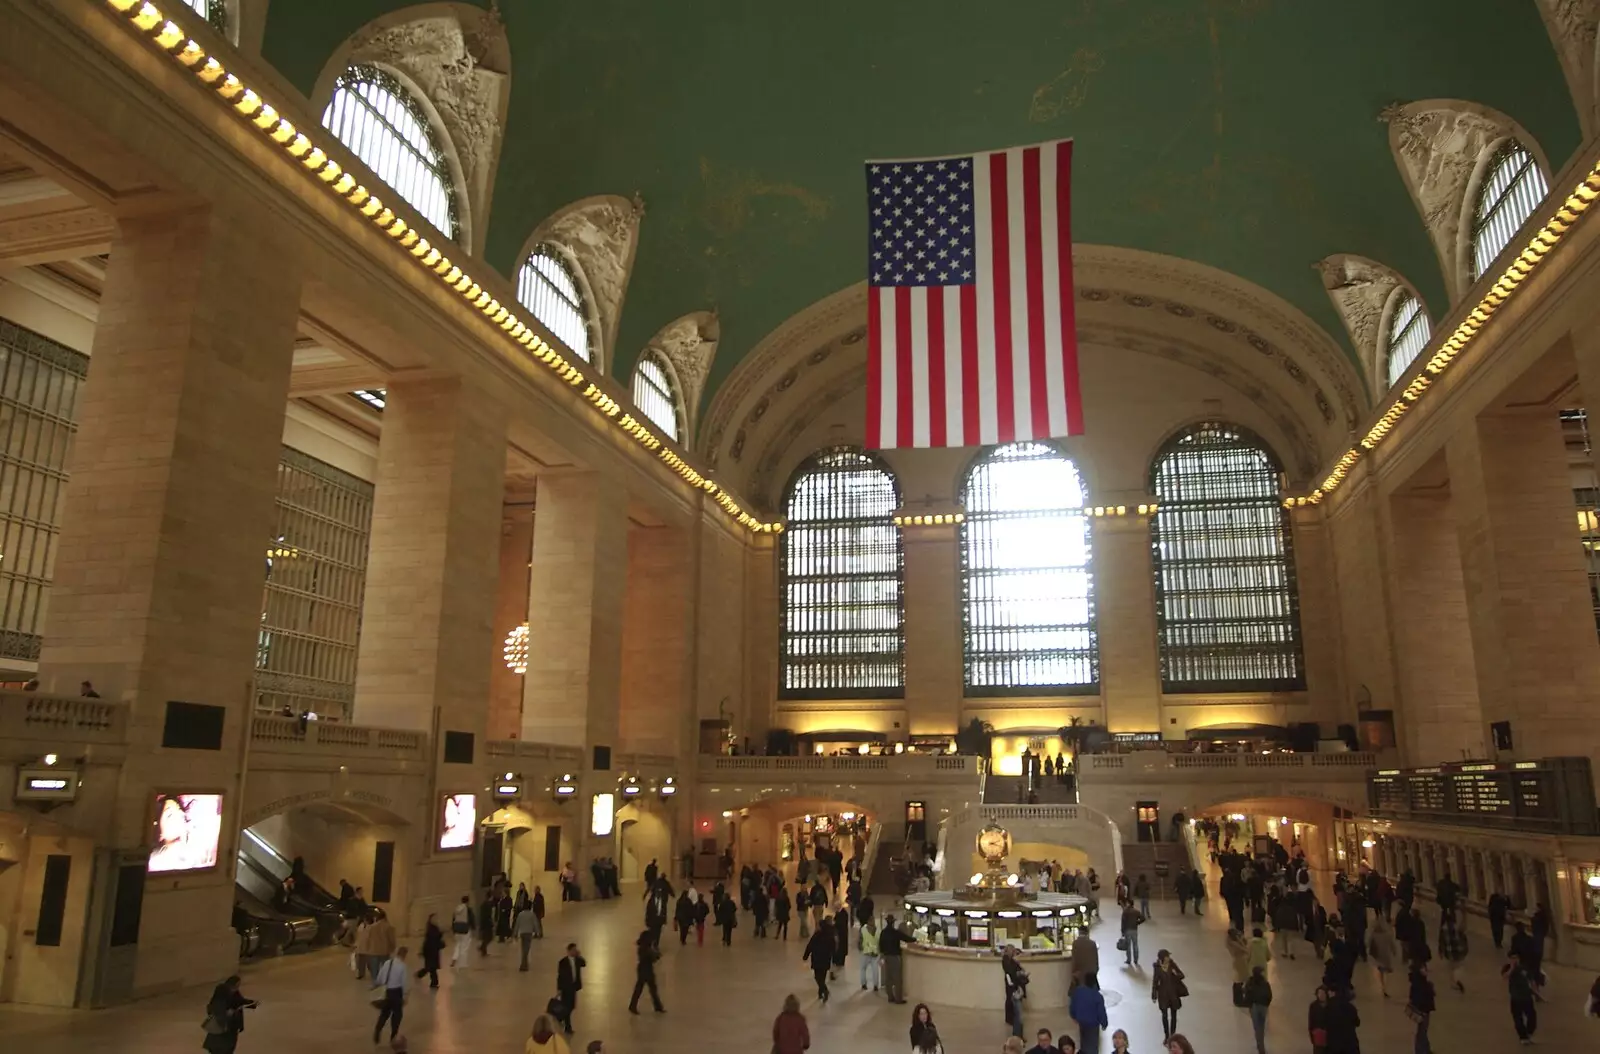 Grand Central's main concourse, from Persian Day Parade, Upper East Side and Midtown, New York, US - 25th March 2007